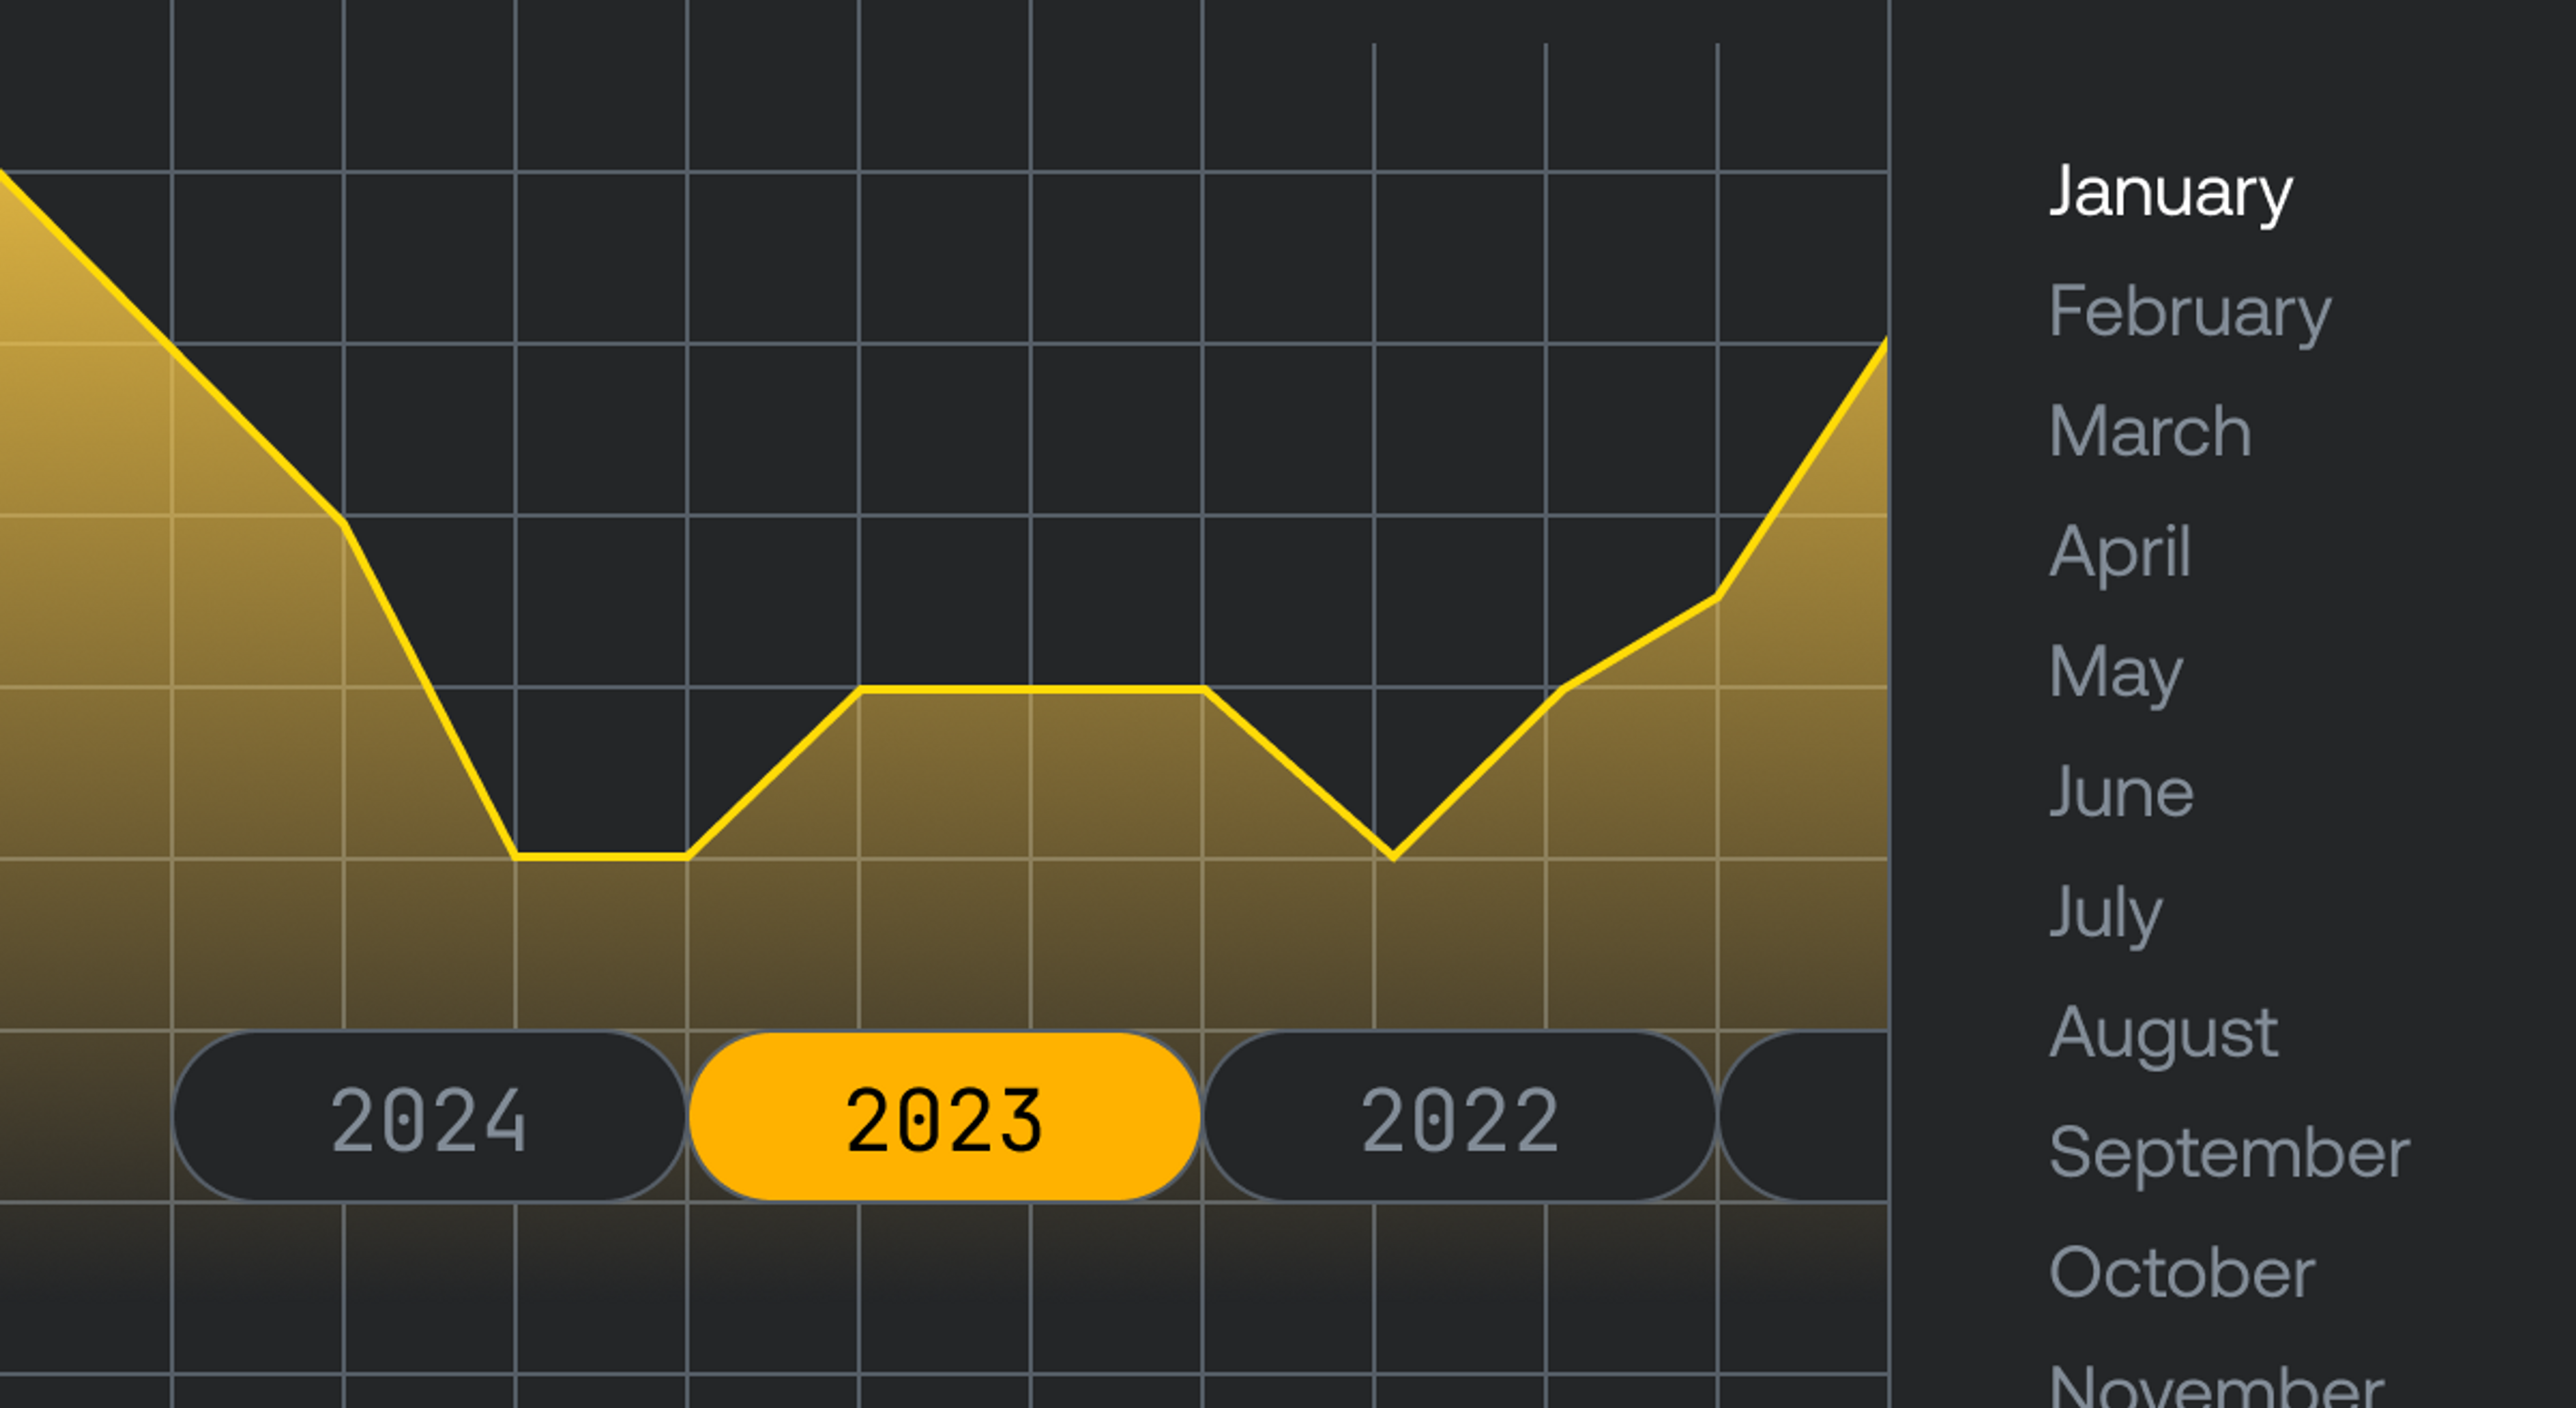 On a dark background is a yellow graph displaying the previous year's data sorted by month